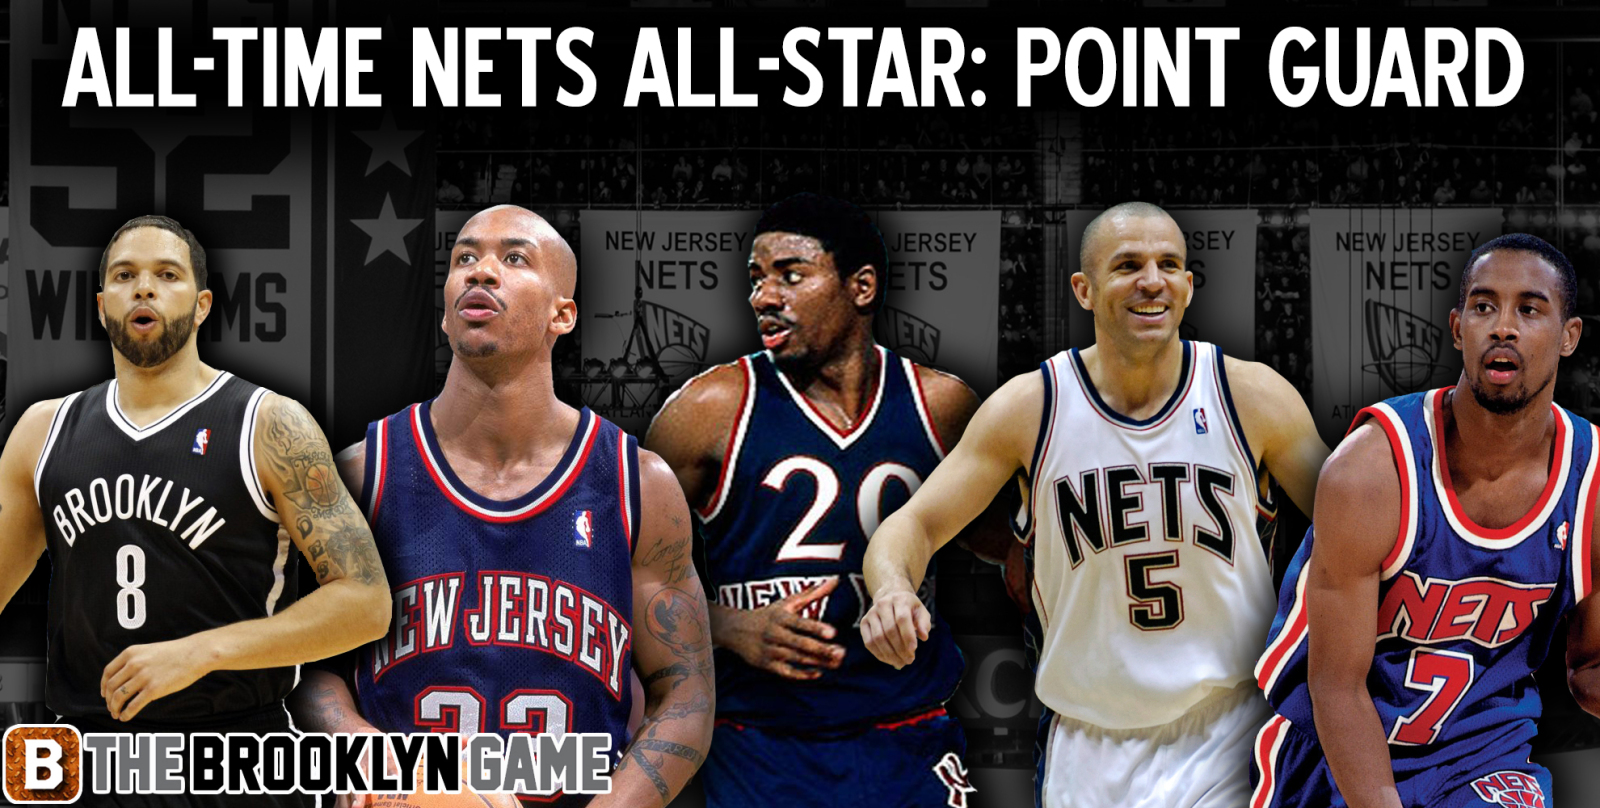 Who's the point guard on your All-Time Nets All-Star Team?